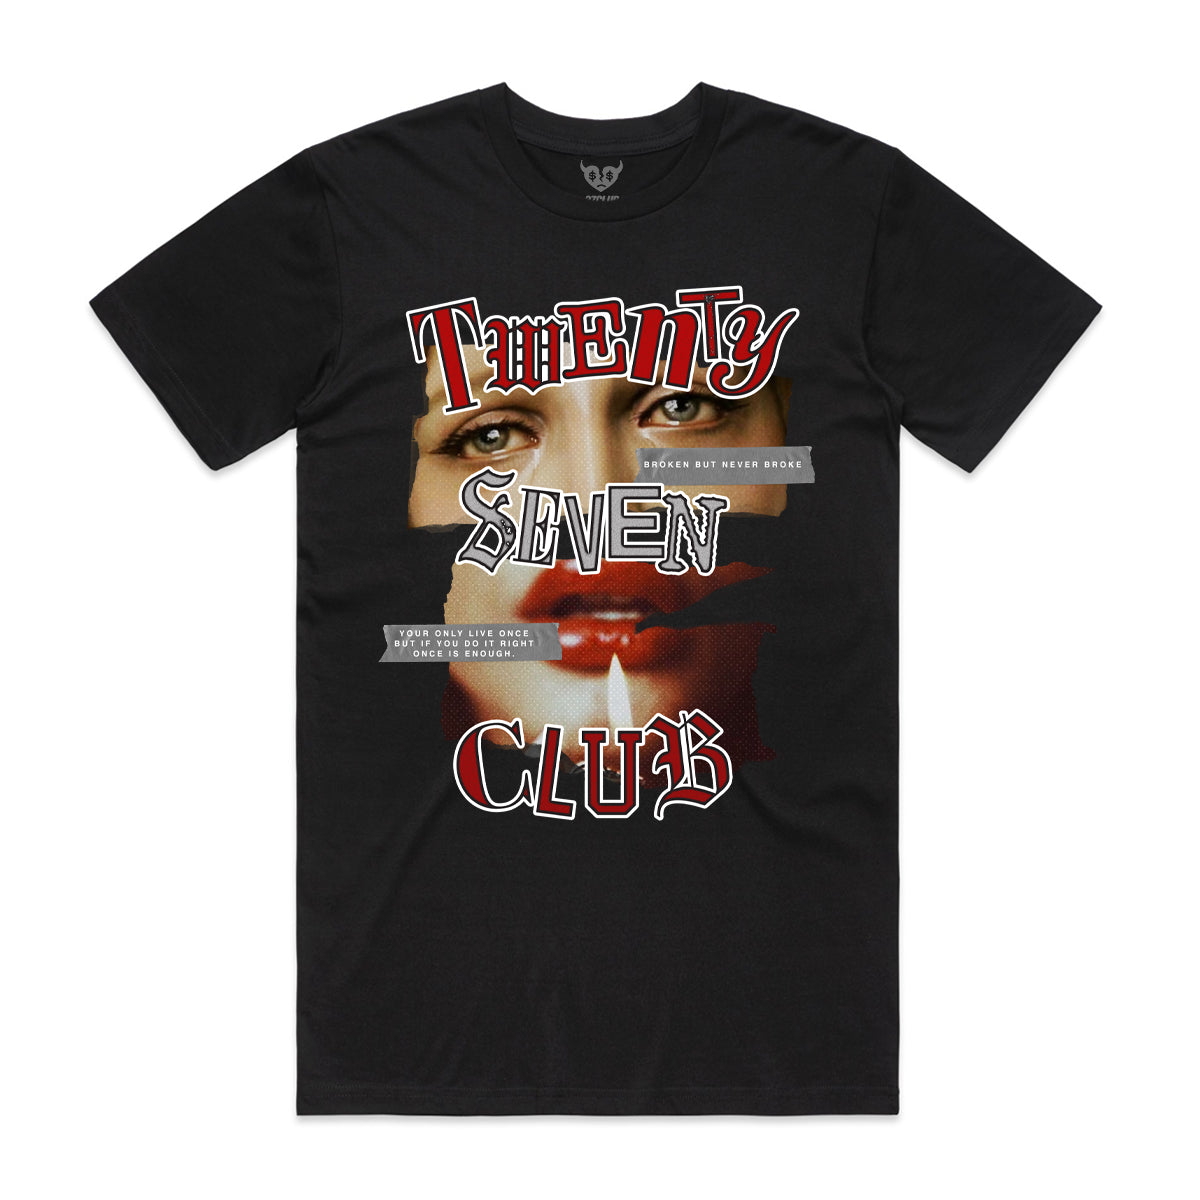 Don't Cry - Tee